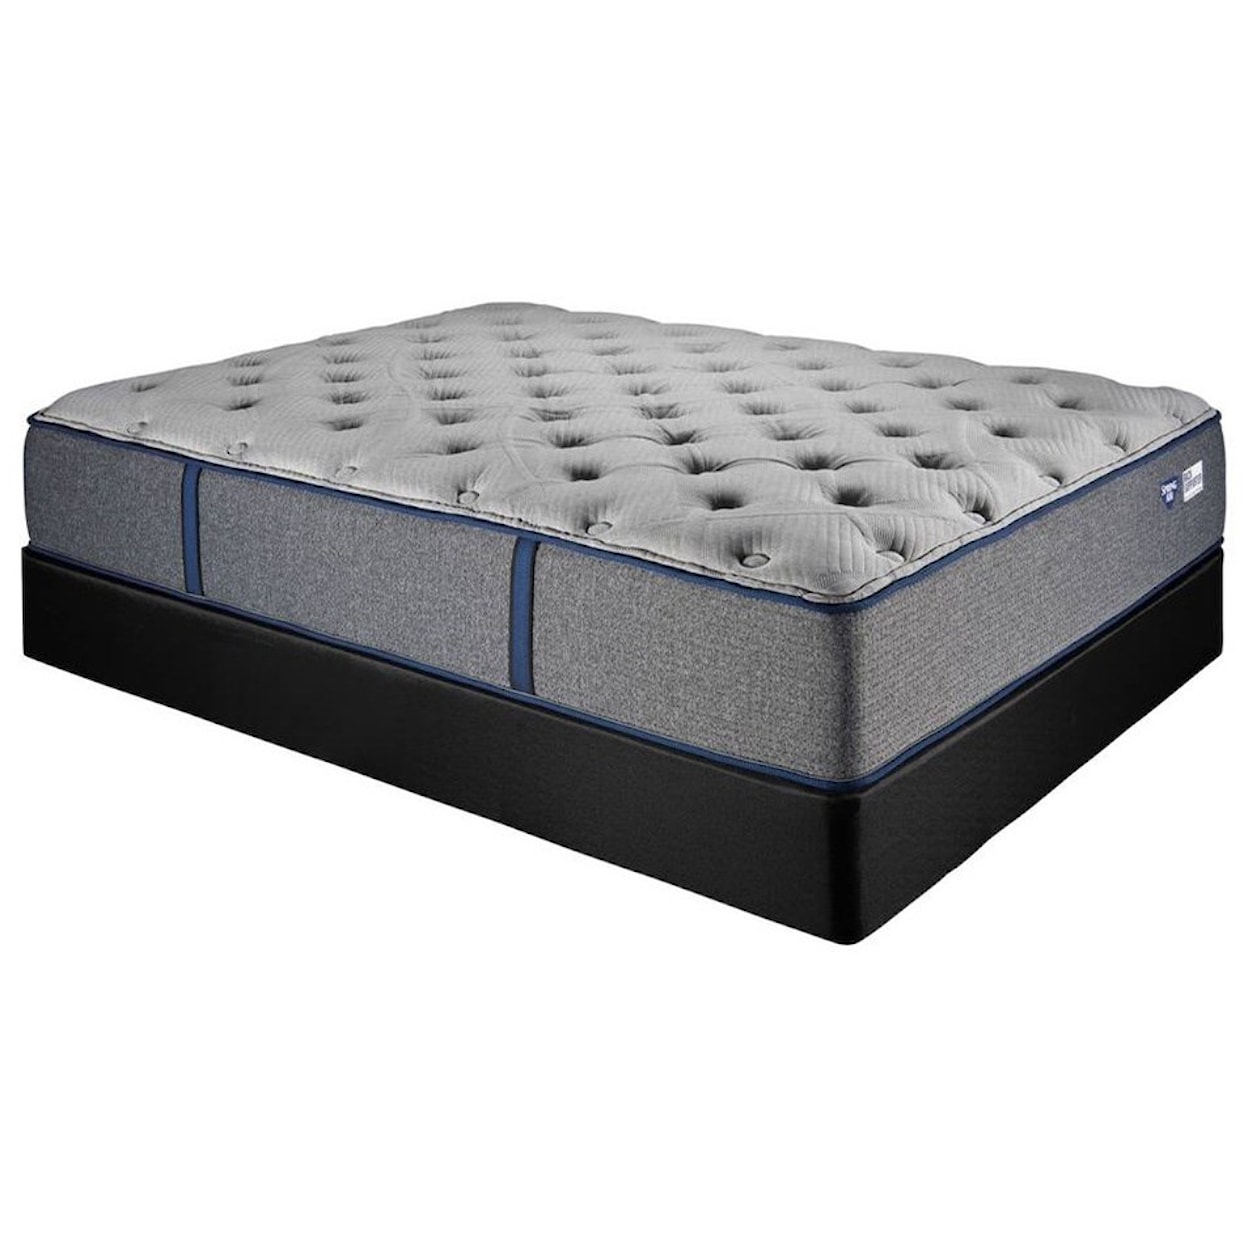 Spring Air Calypso P King Pocketed Coil Mattress Low Pro Set